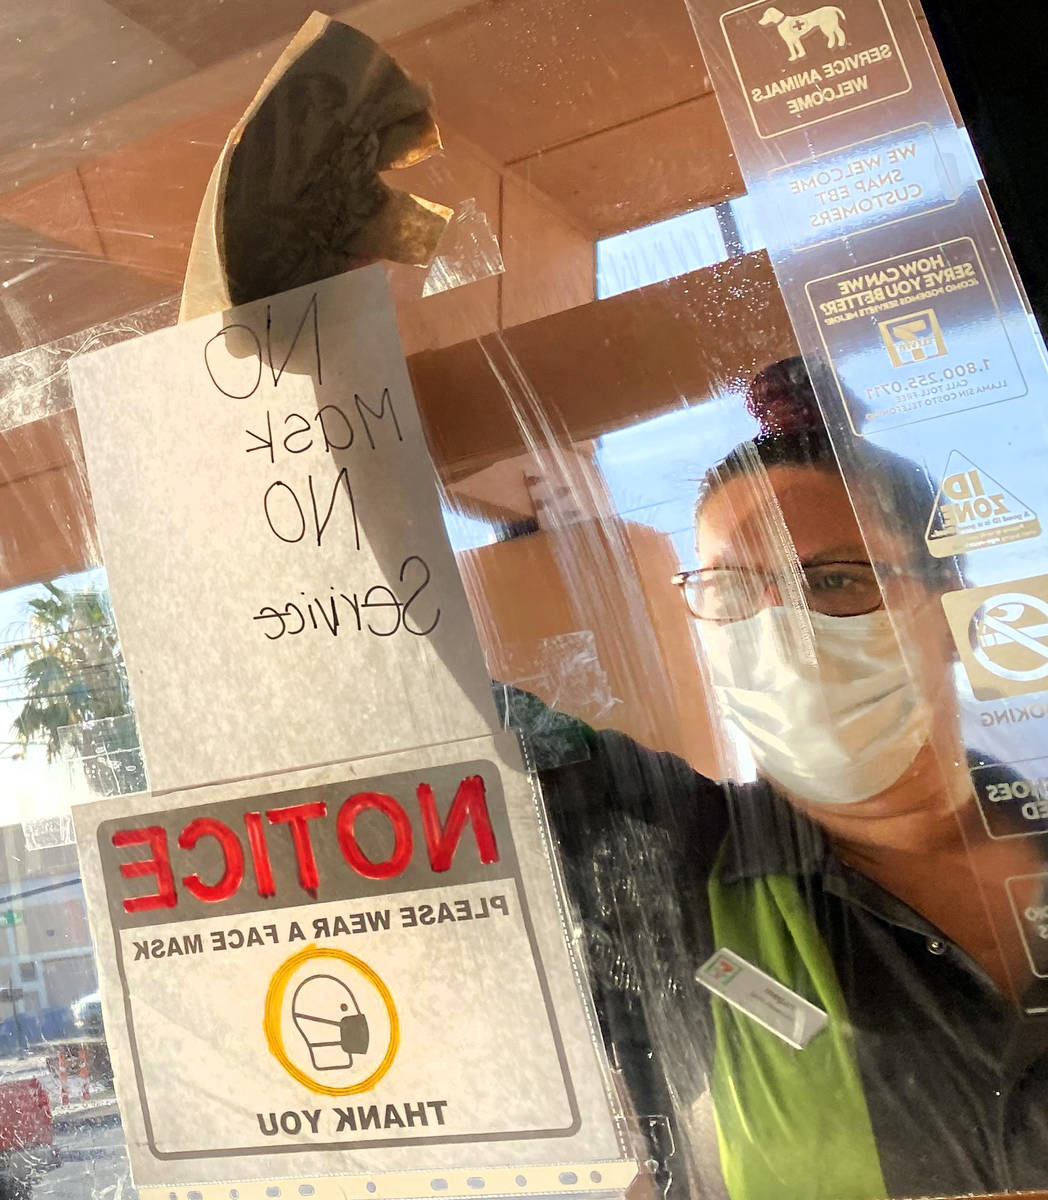 A clerk washes a window with a "No Mask No Service" sign at 7-11 on Las Vegas Bouleva ...